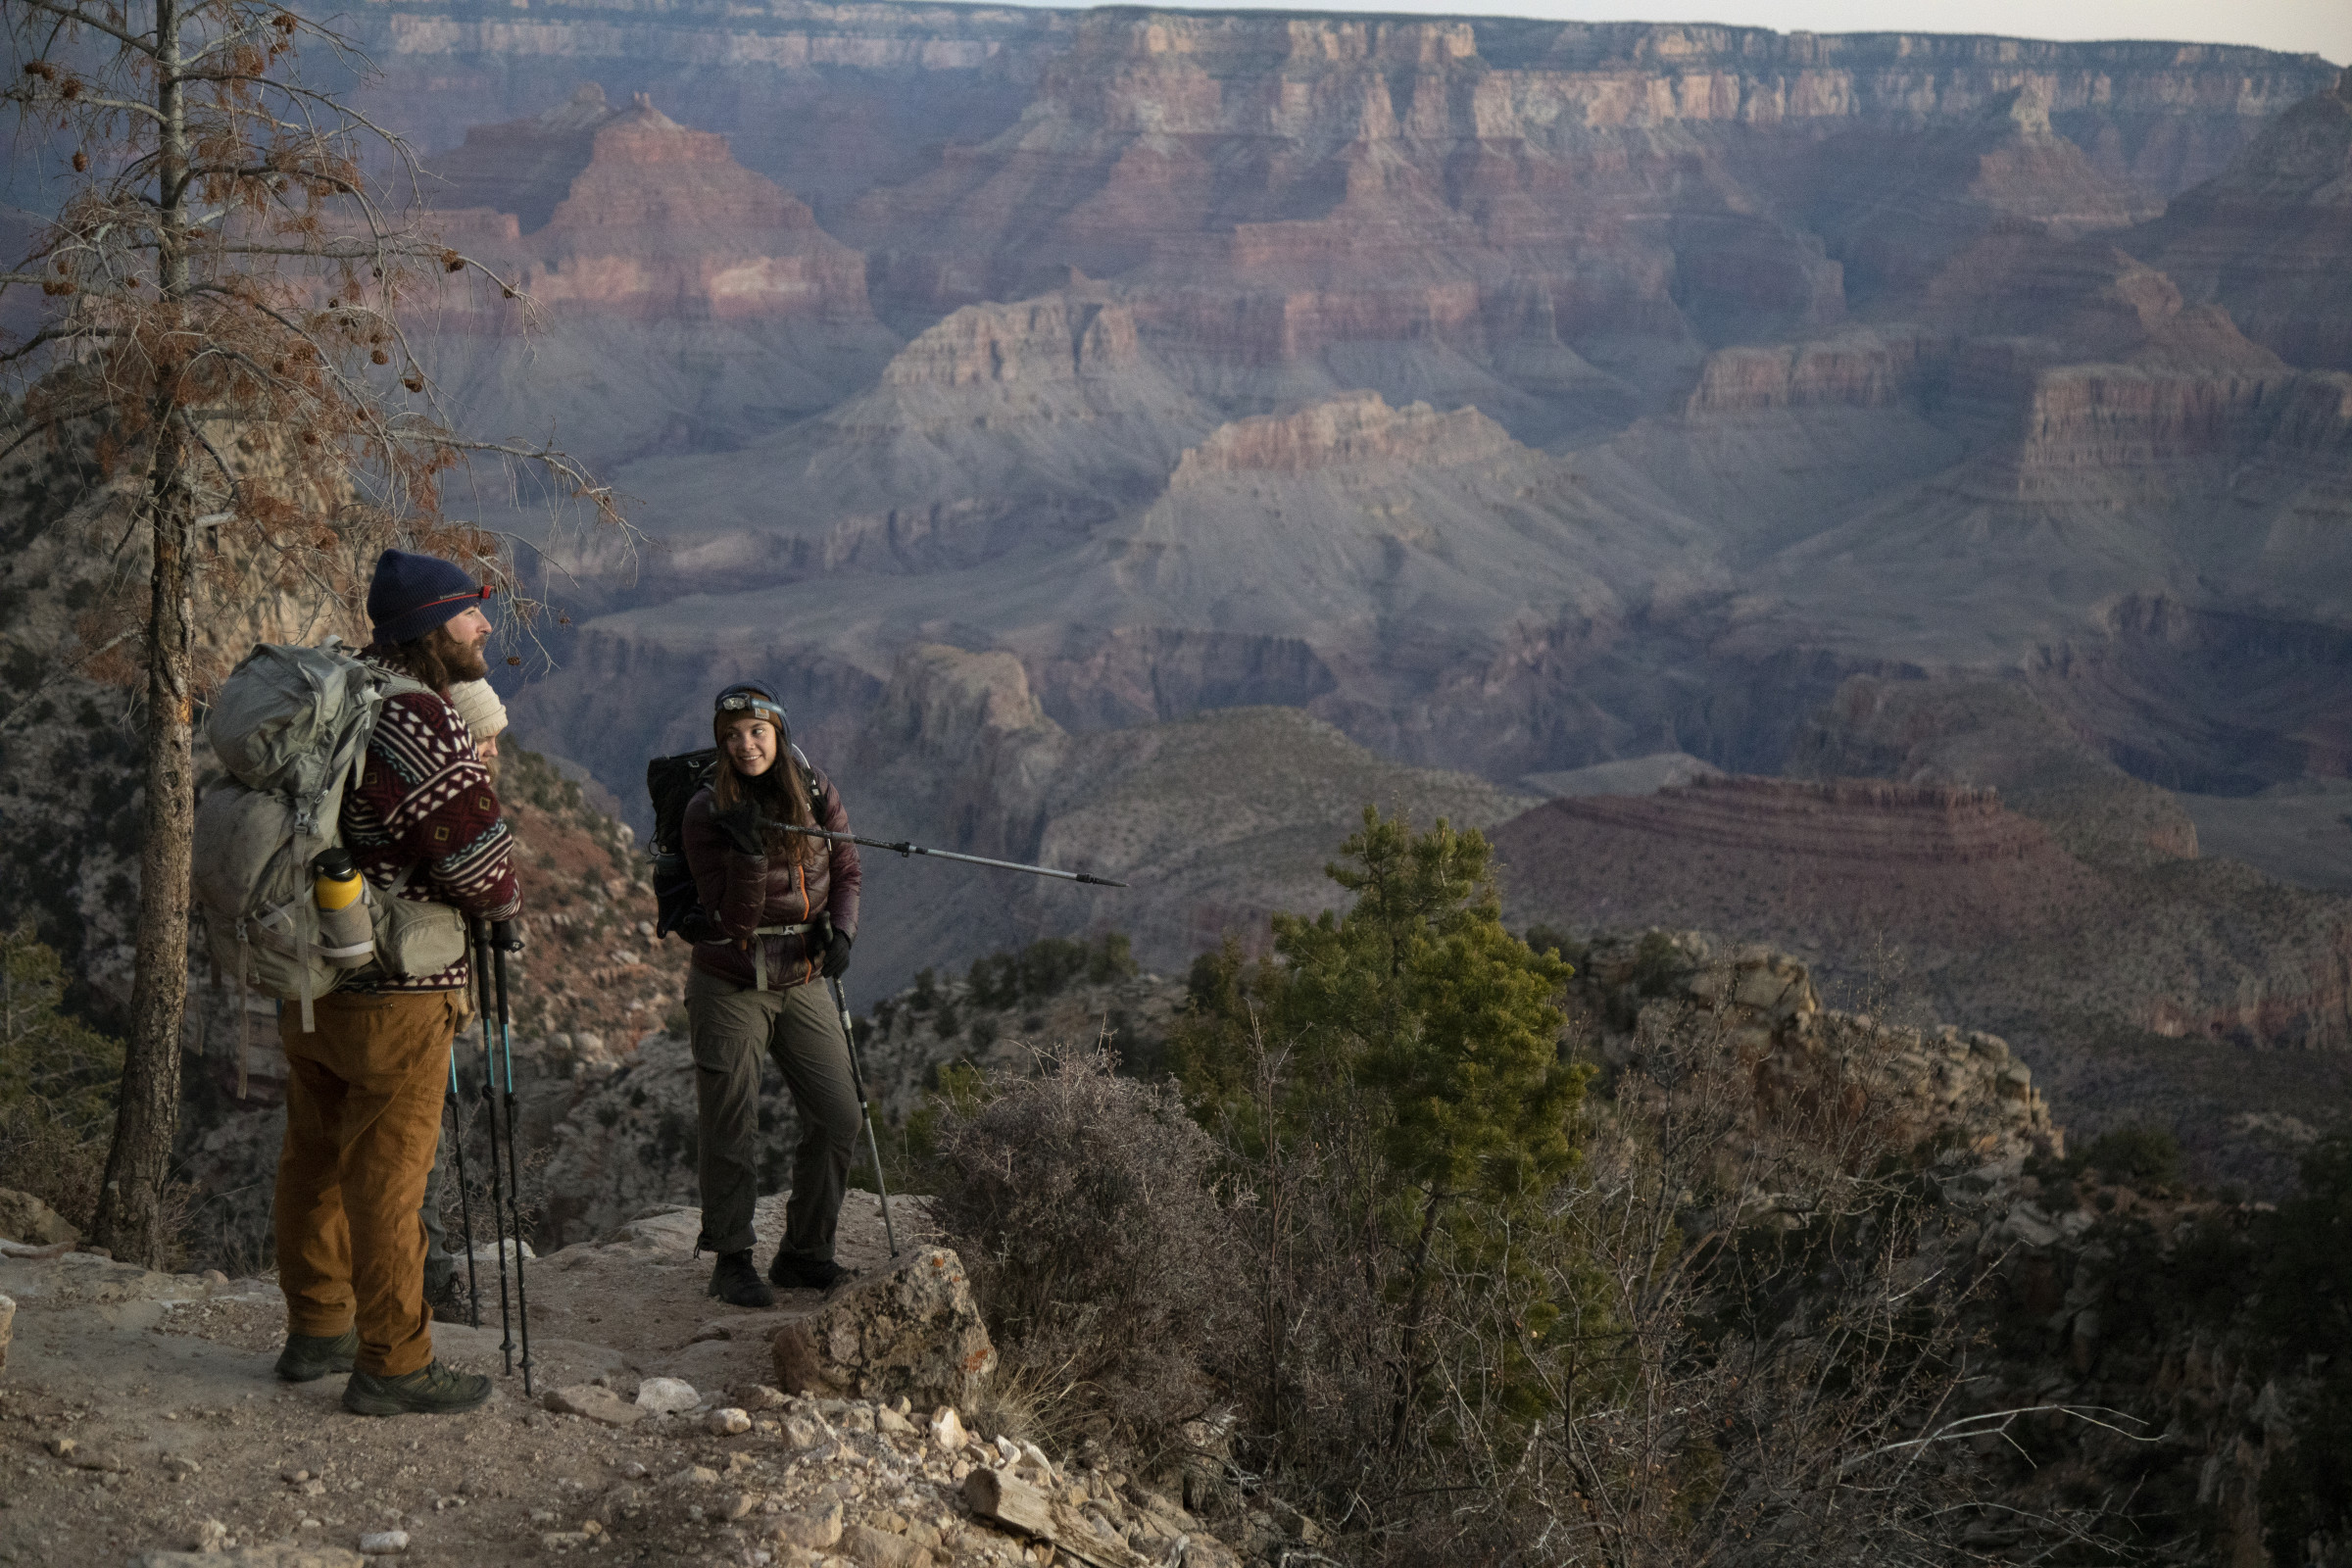 Sara Burch and Adam Wetherall backpacking in the Grand Canyon.